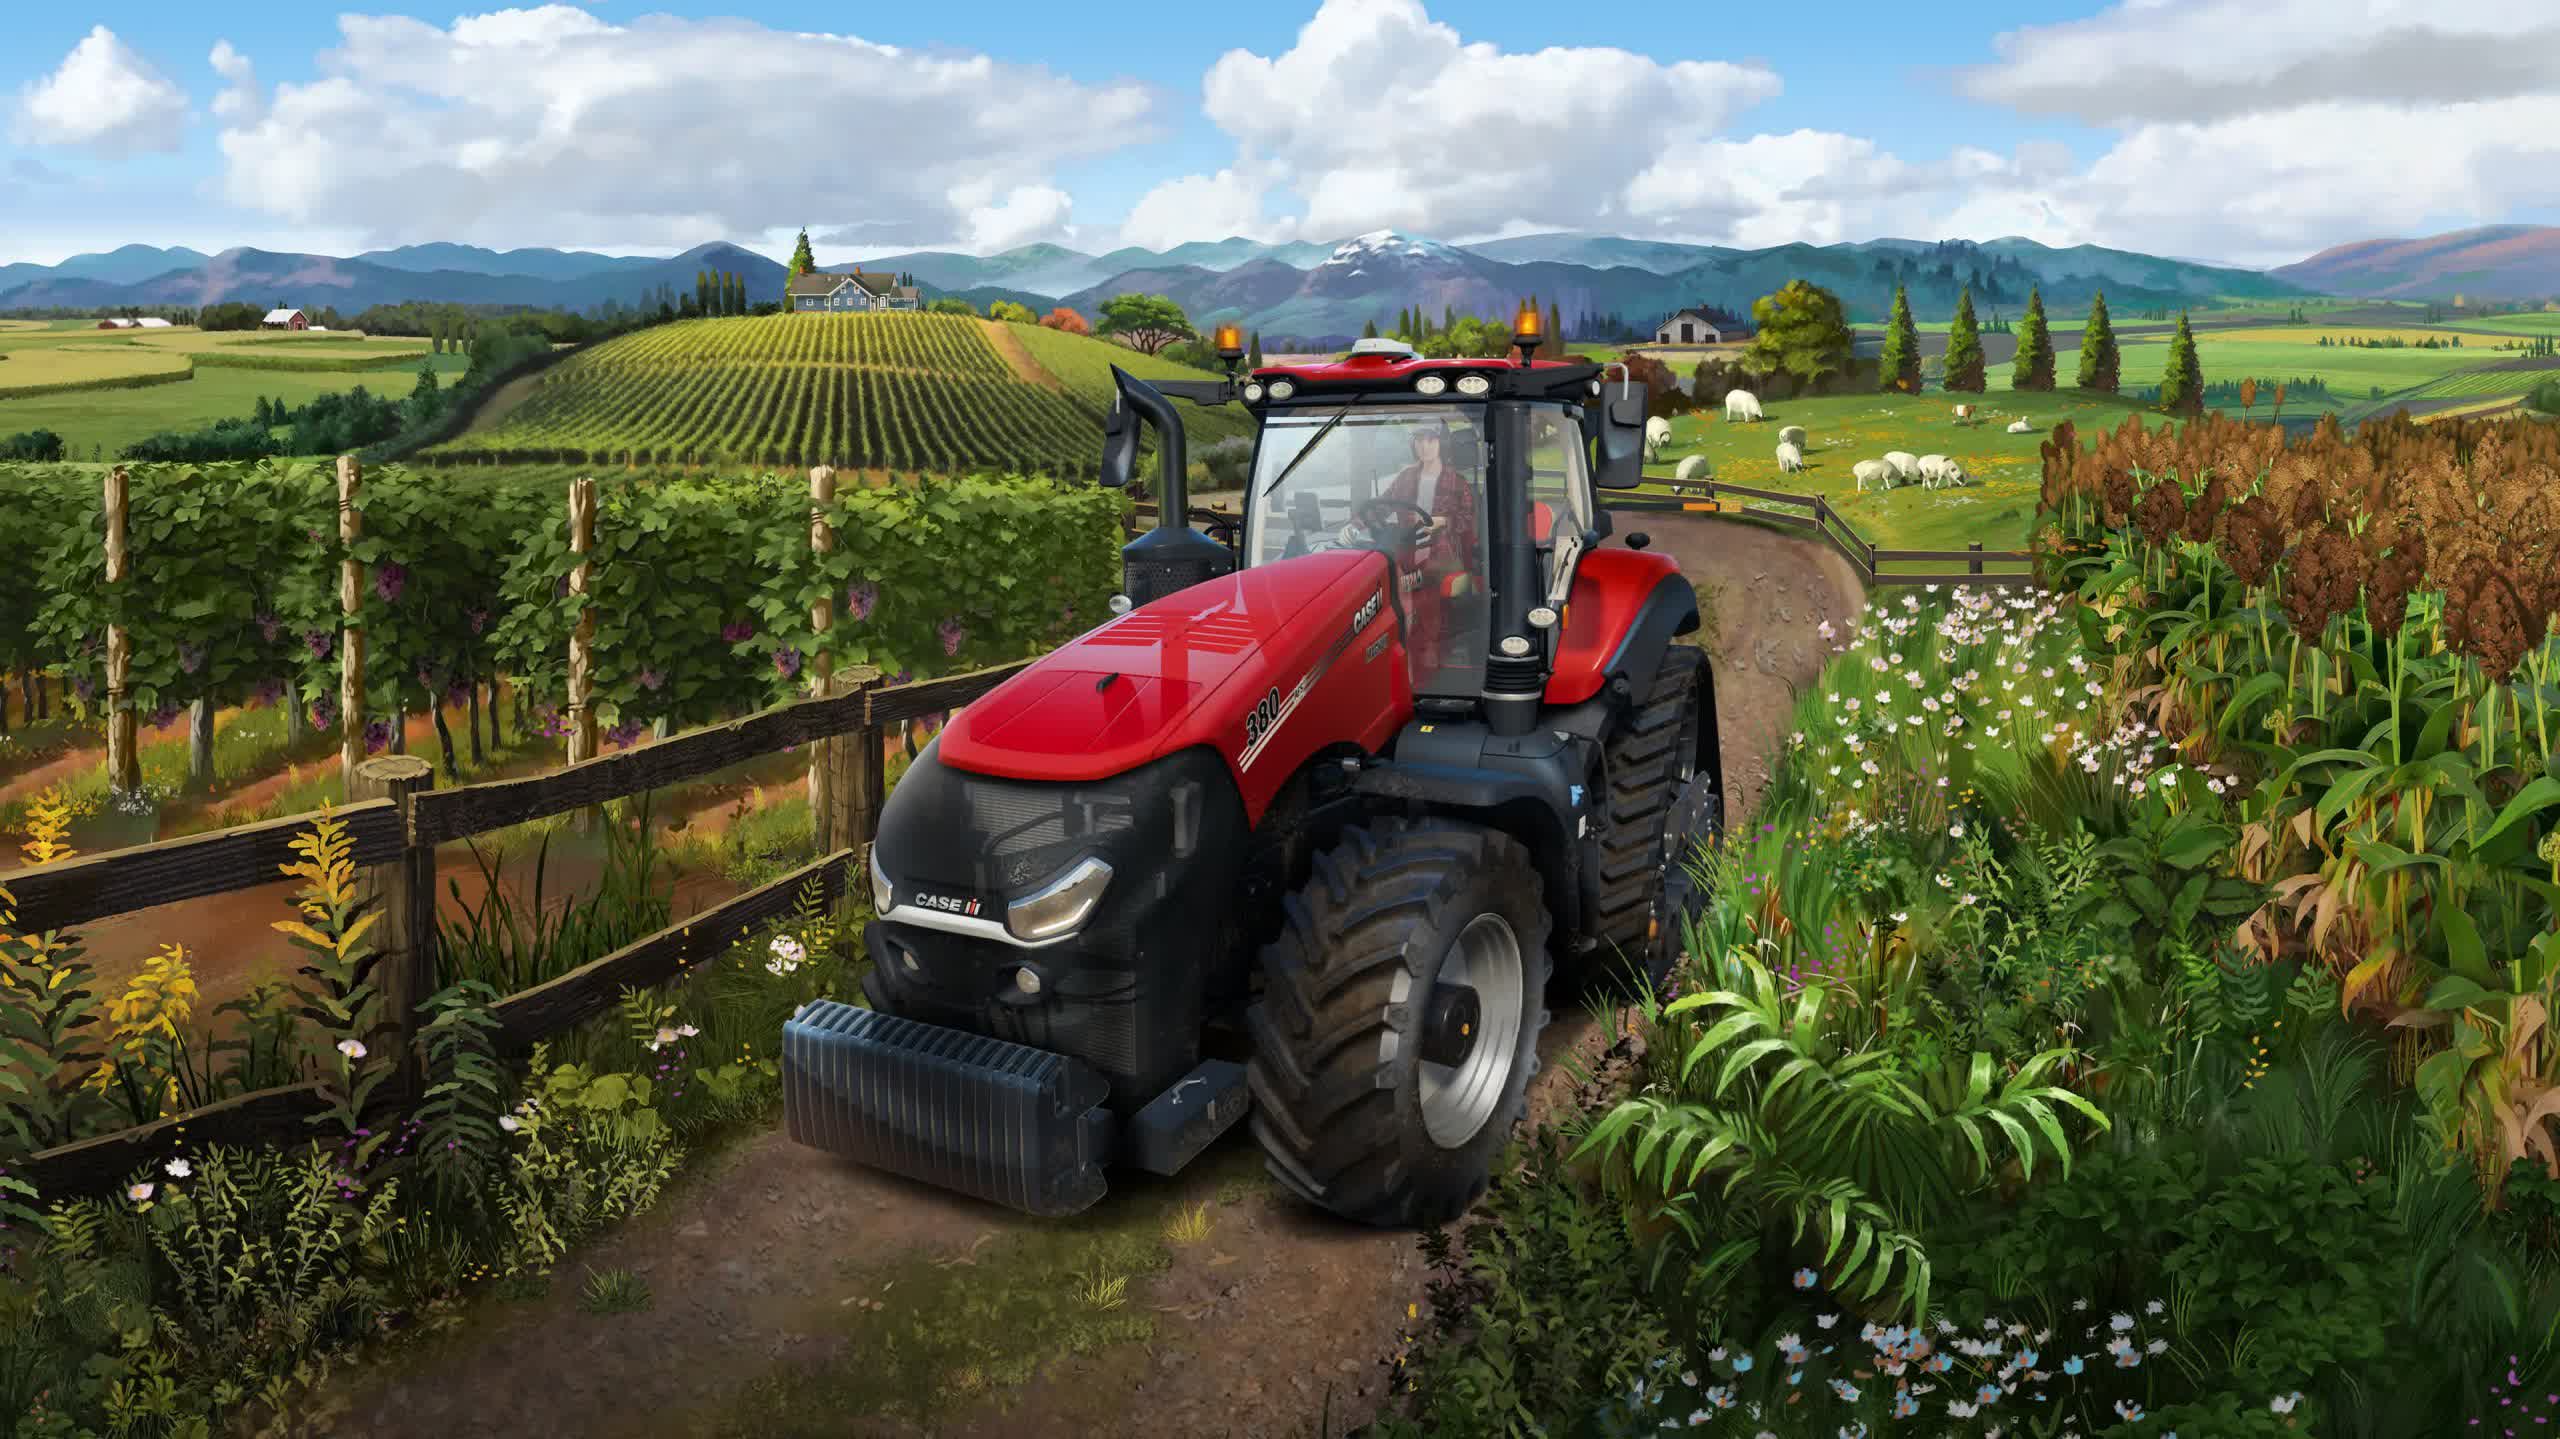 Farming Simulator plows the way for equipment manufacturers' ad campaigns